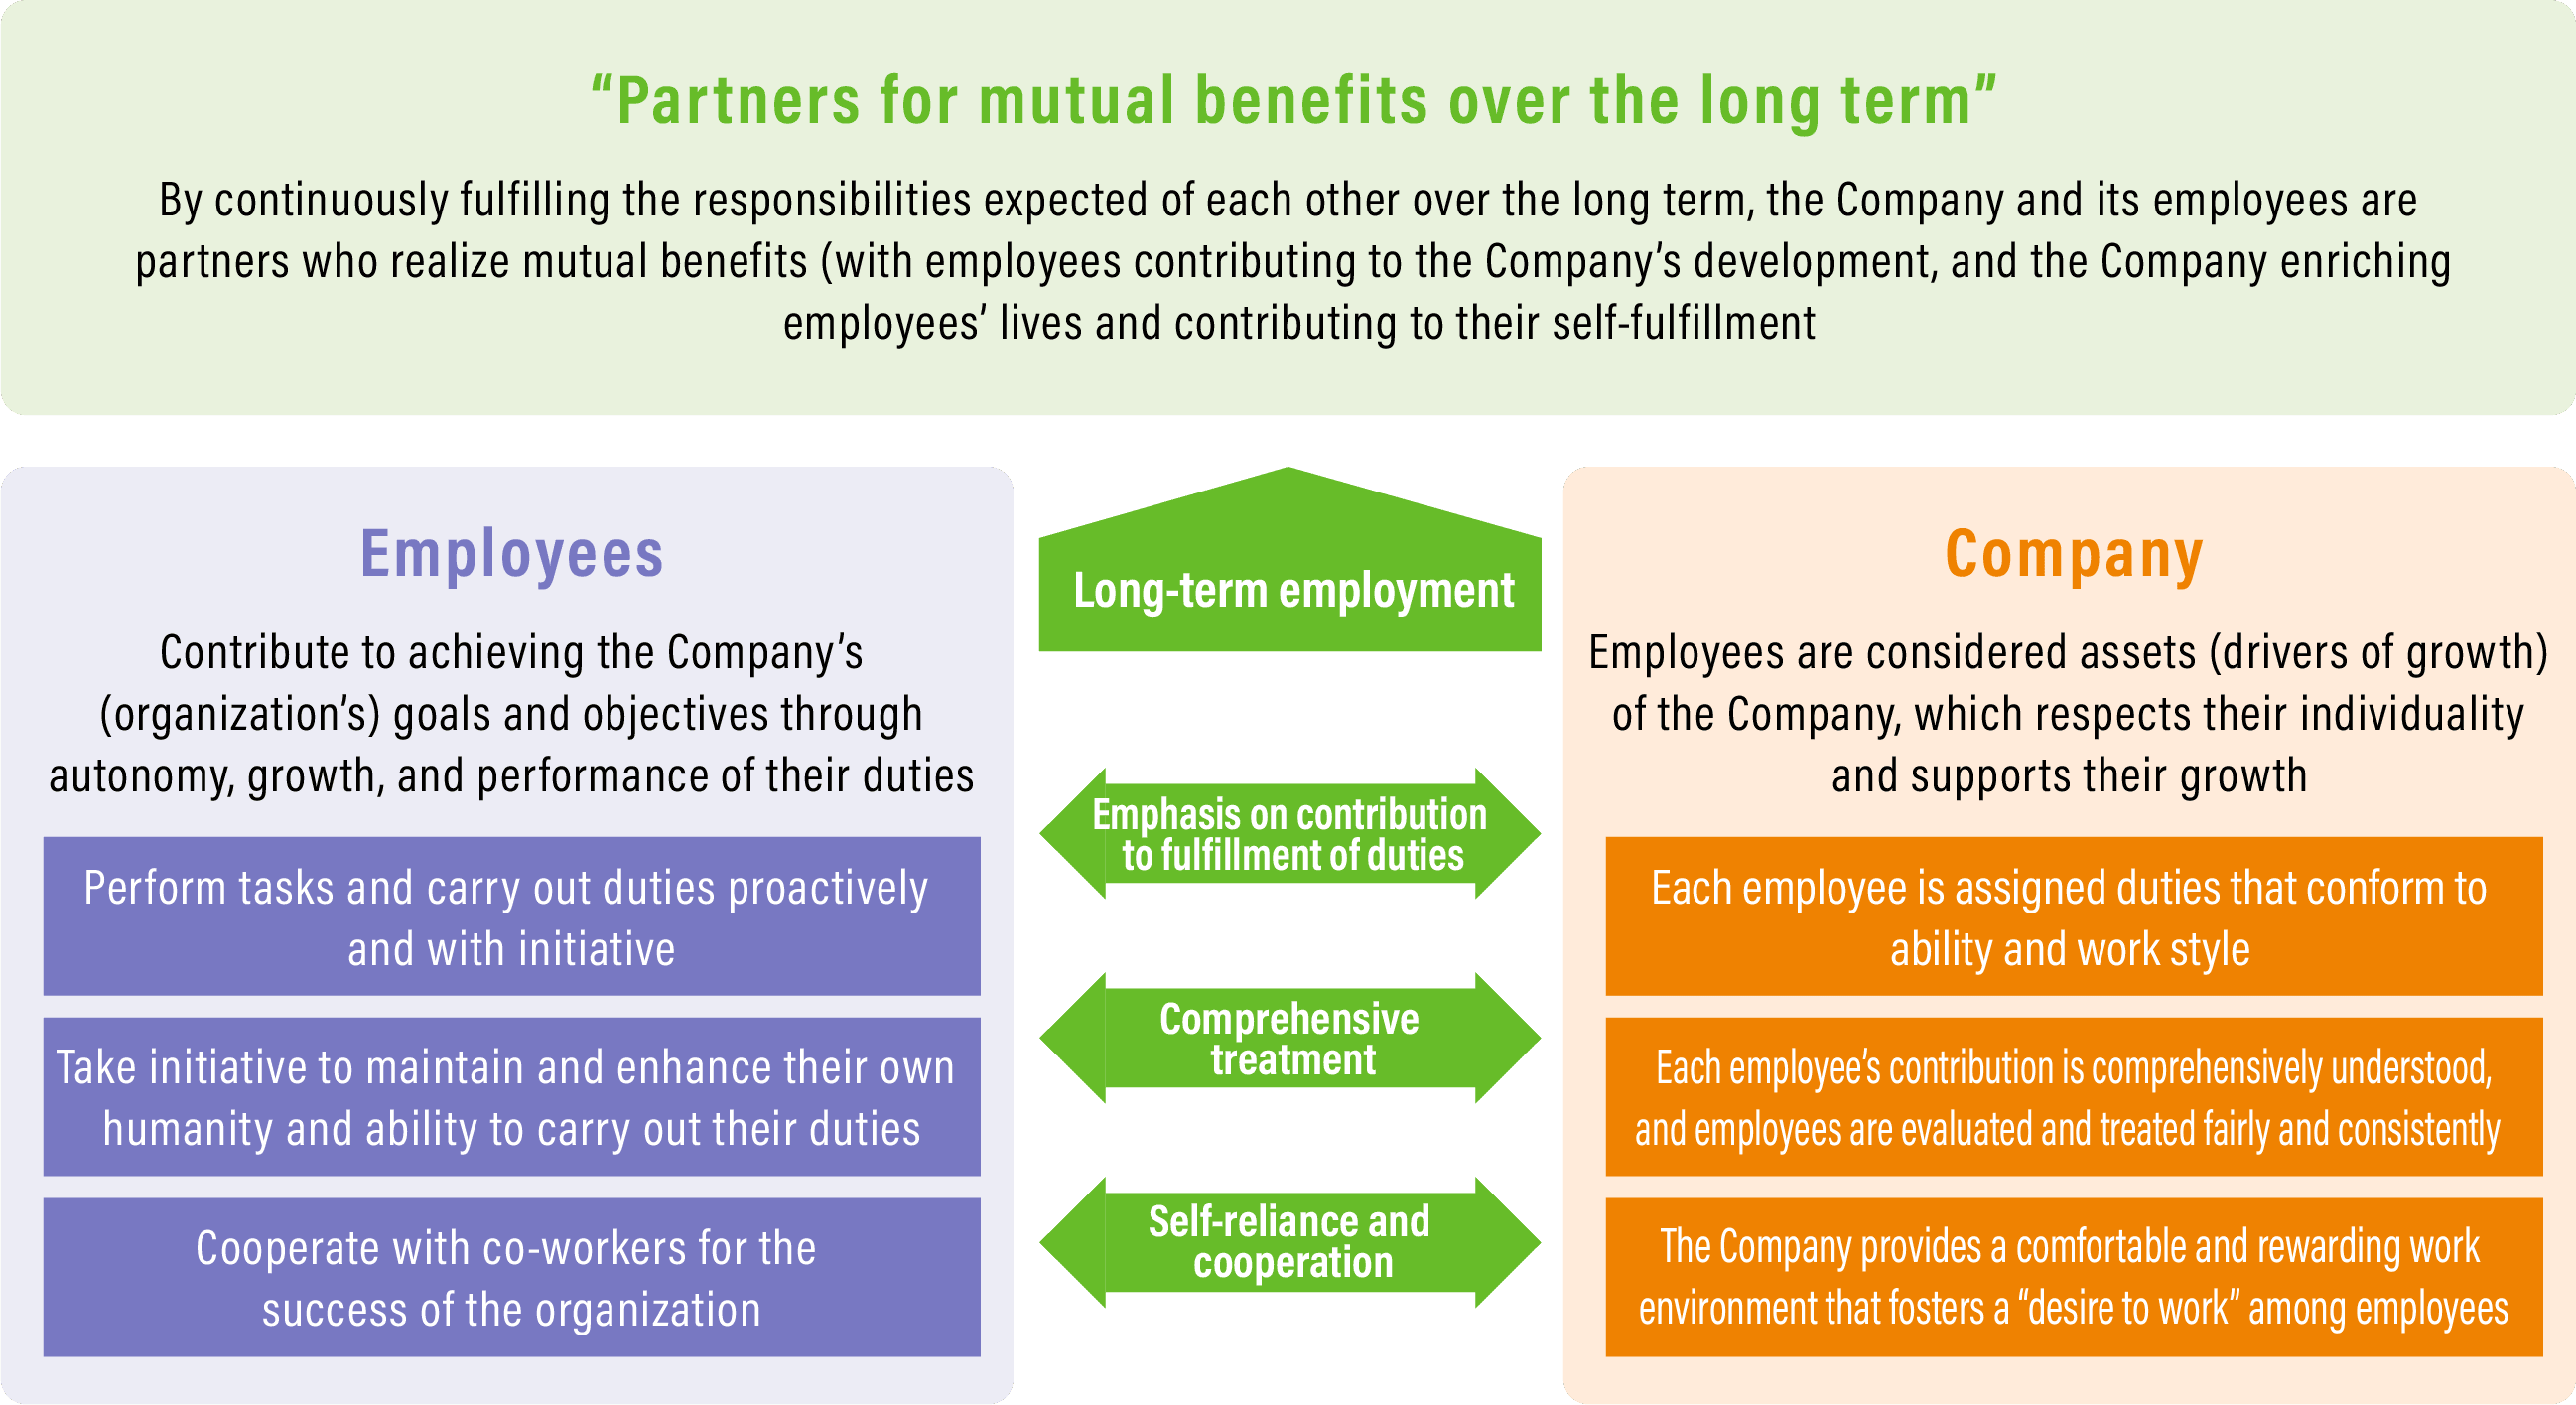 Image: Partners for mutual benefits over the long term